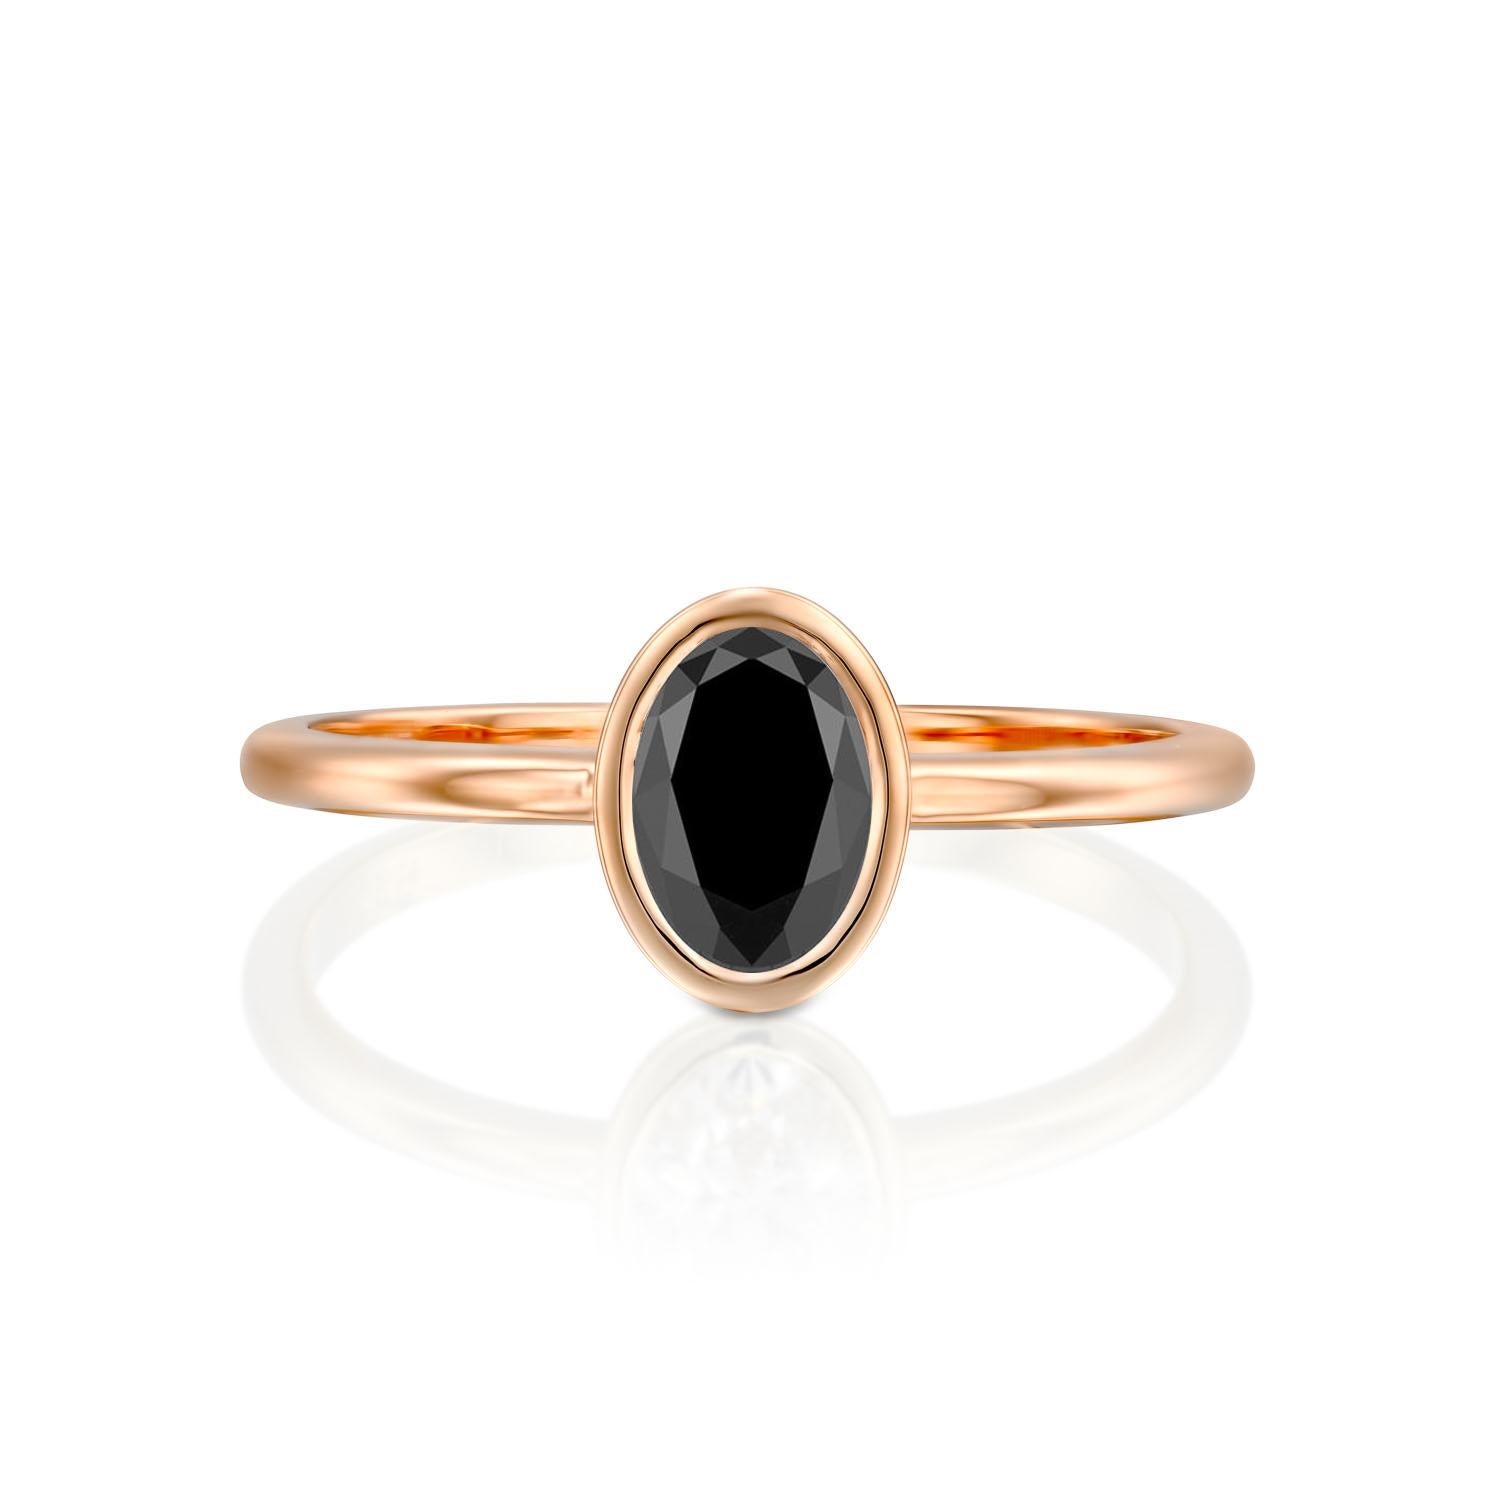 Beautiful minimalistic style black diamond engagement ring ring. Center stone is of 1 carat, natural, oval shaped, AAA quality Black diamond. Set in a sleek, 14K rose gold, solitaire ring with a bezel setting. The setting looks delicate but is